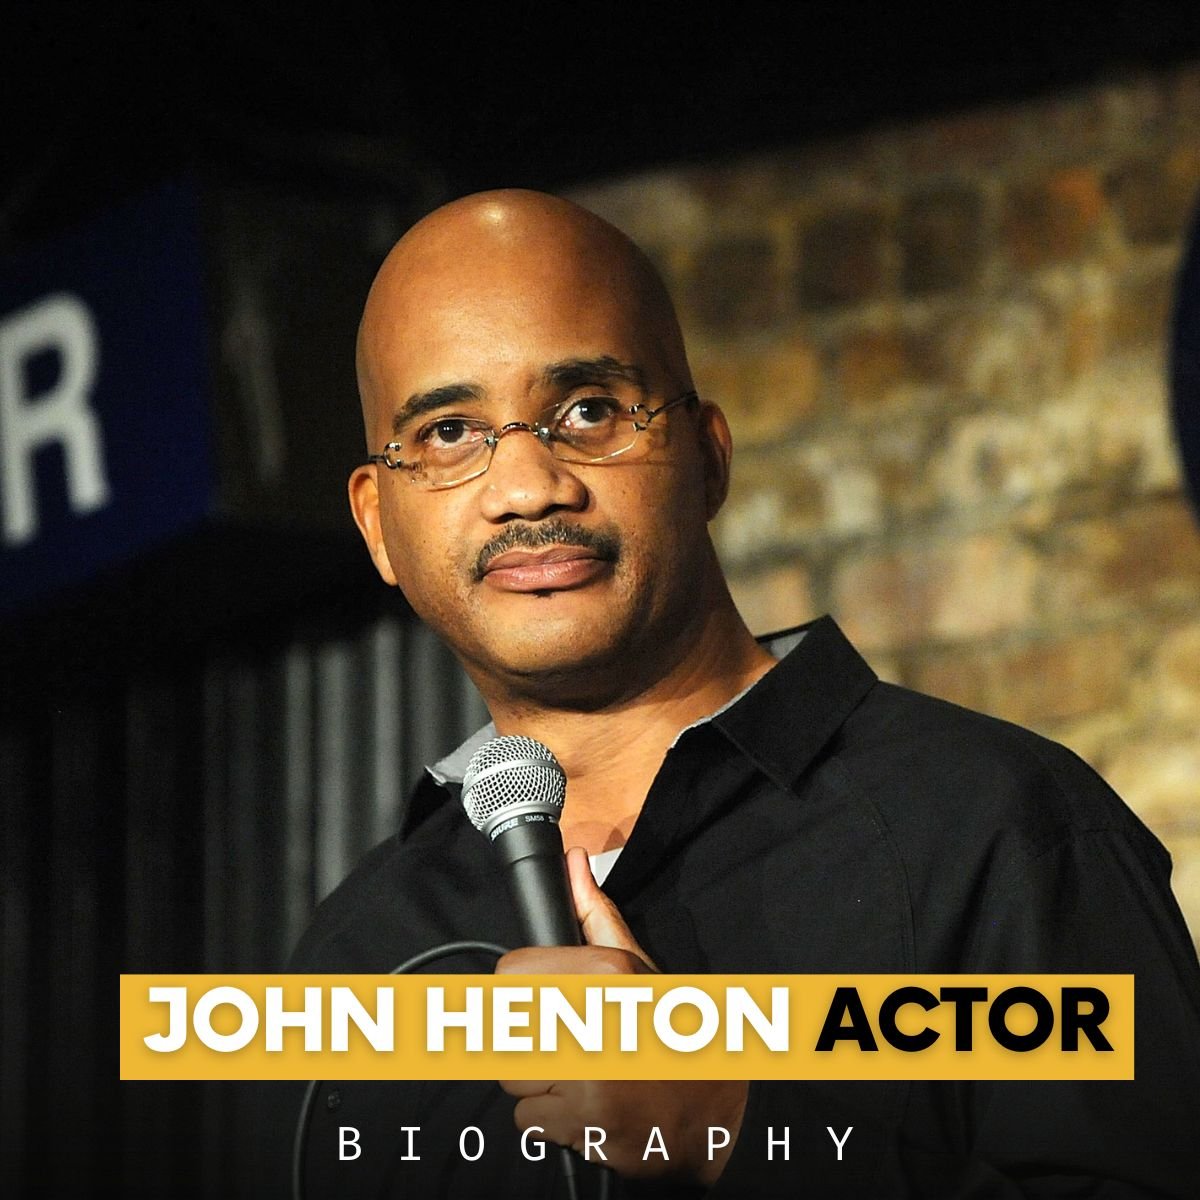 Picture of John Henton Actor from one of his comedy shows